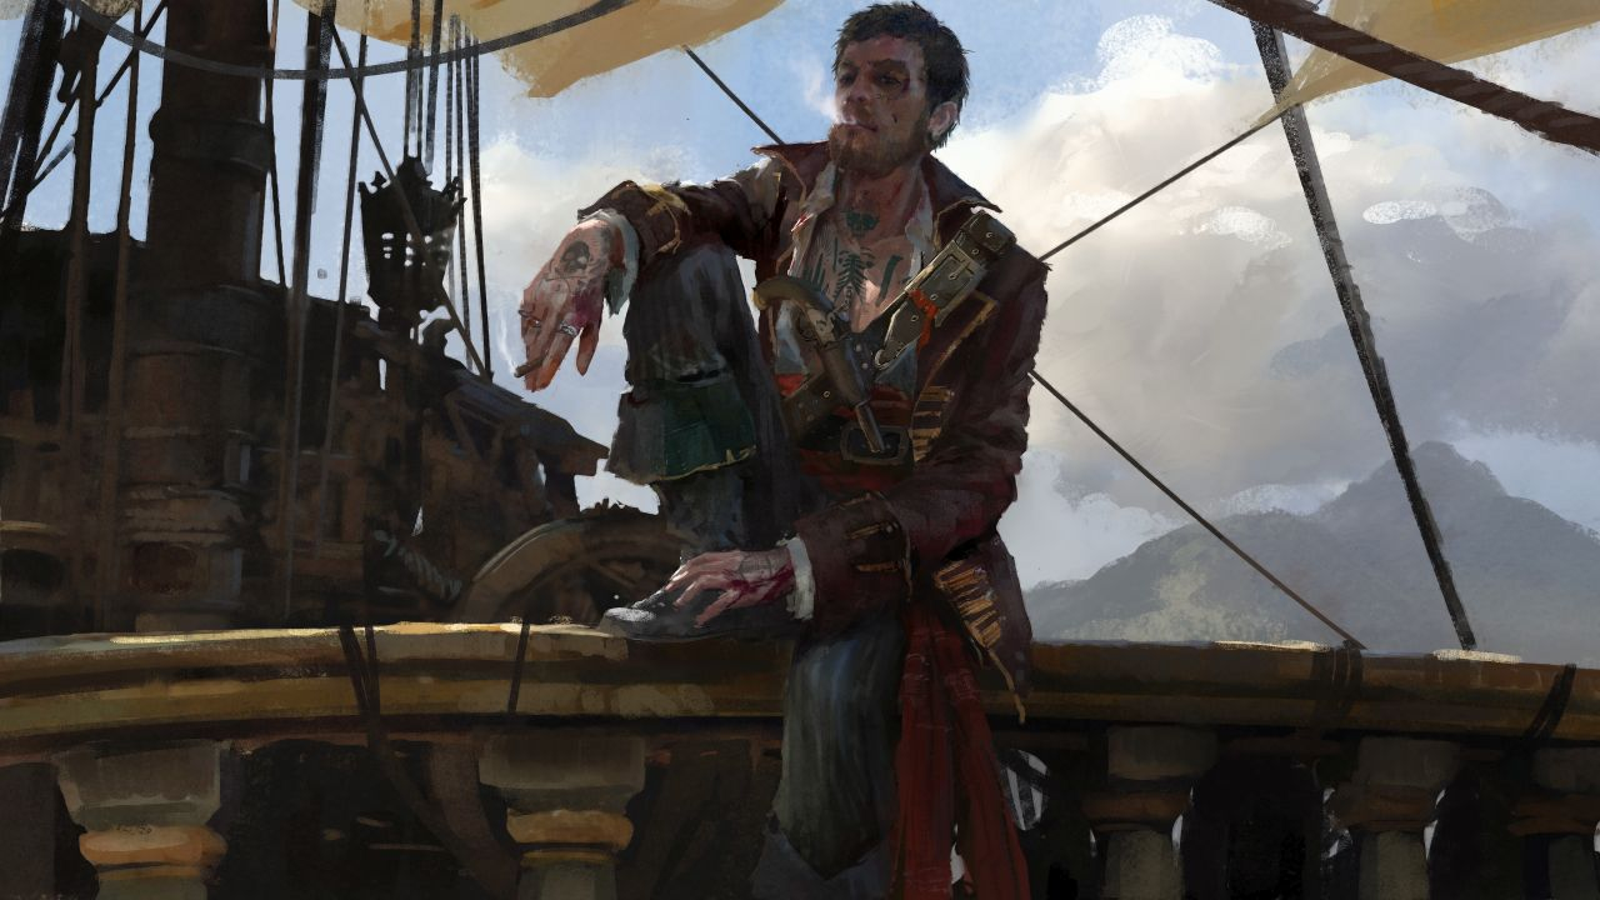 E3 2018: Skull And Bones Trailer Depicts The Golden Age Of Piracy - GameSpot